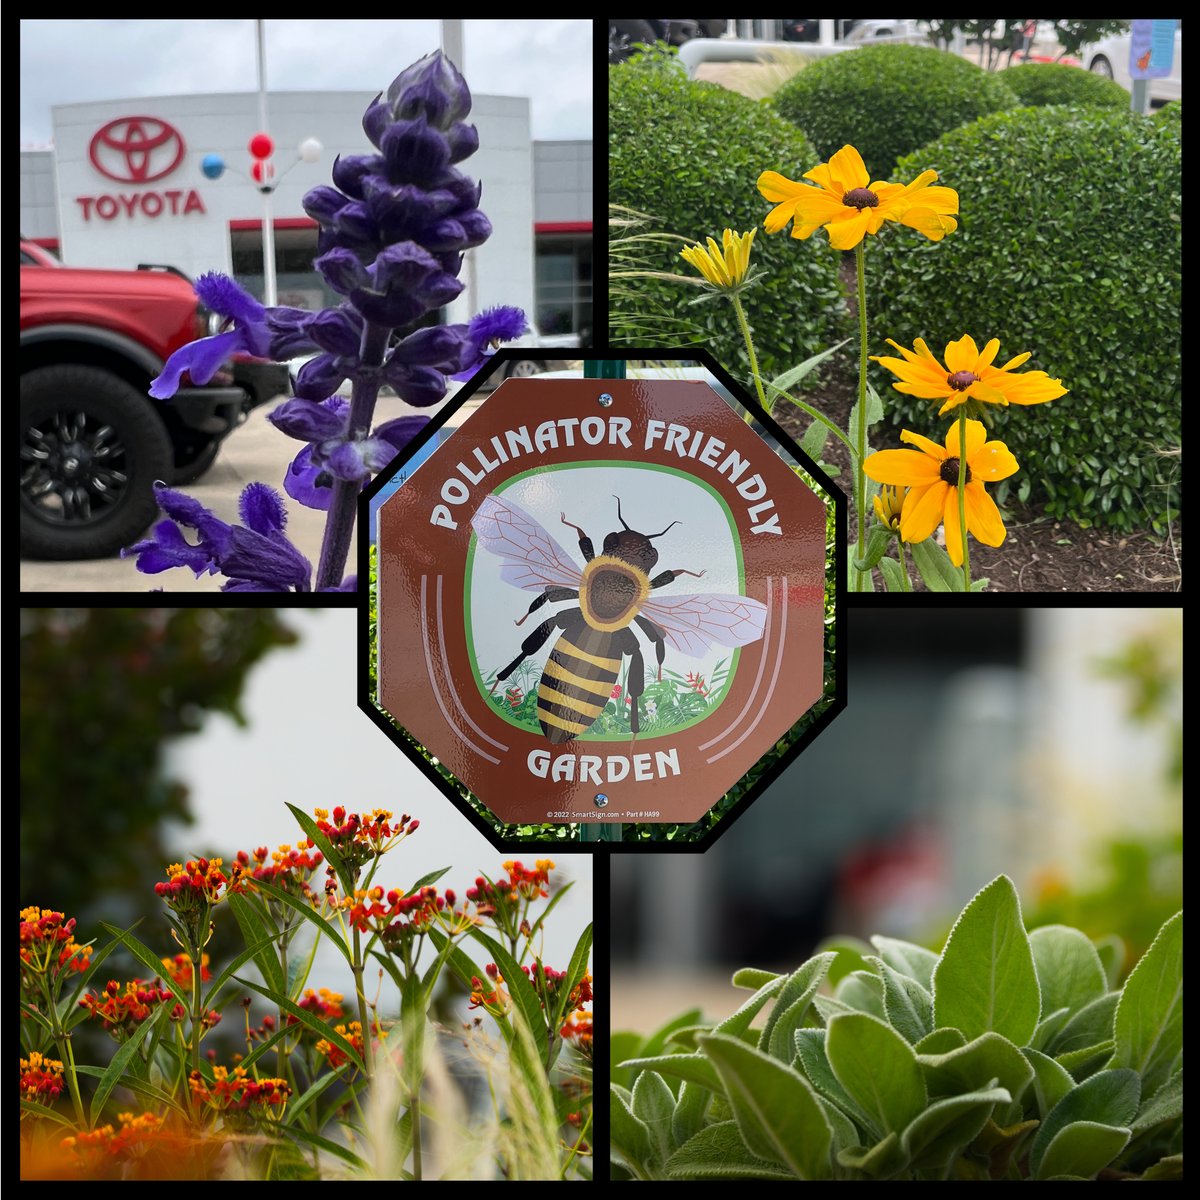 Spring is in full swing here at Toyota of Irving, as evidenced by our gorgeous new #PollinatorGarden! Irving is a busy, growing area and we want to make sure there's still plenty of pollen for local bees and migrating butterflies as they pass through. 🐝🌺 🦋 #LEED #DEEP